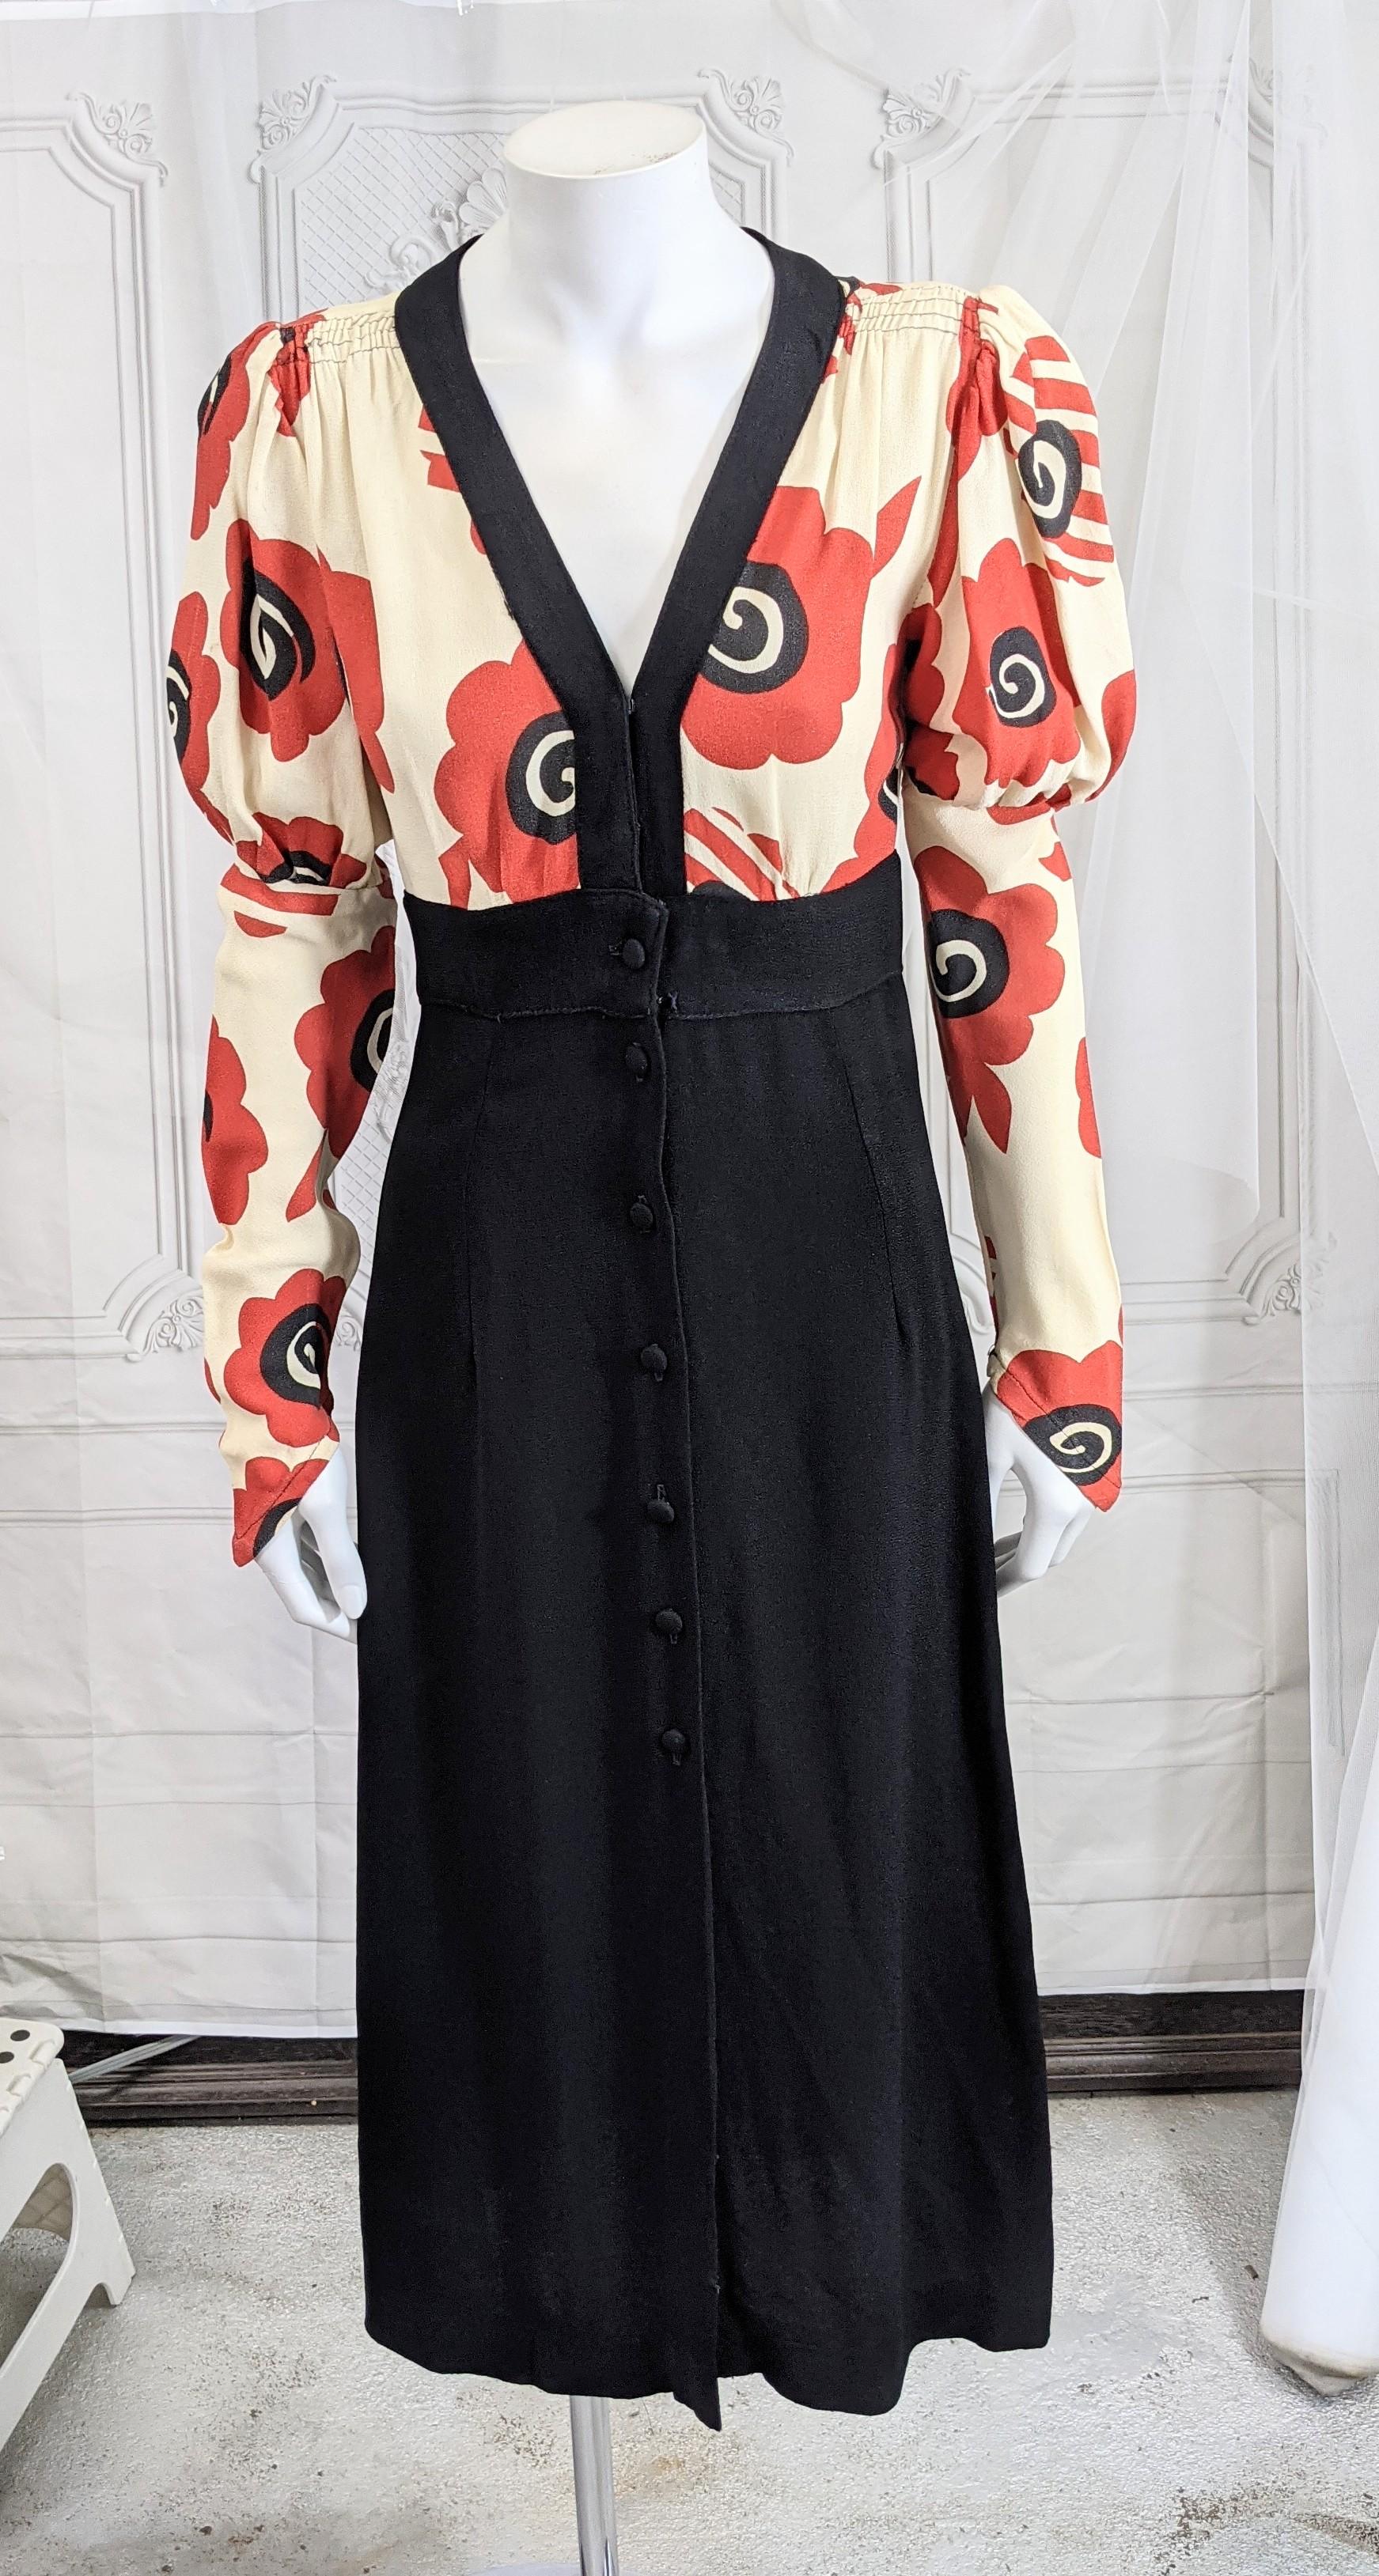 Iconic Ossie Clark for Radley black moss crepe day dress, with a red and black Art deco inspired poppy print by Celia Birtwell.  Self covered buttons, puffed sleeves narrow to wrist with a pointed edge. High waisted with flared A line skirt. 
Circa